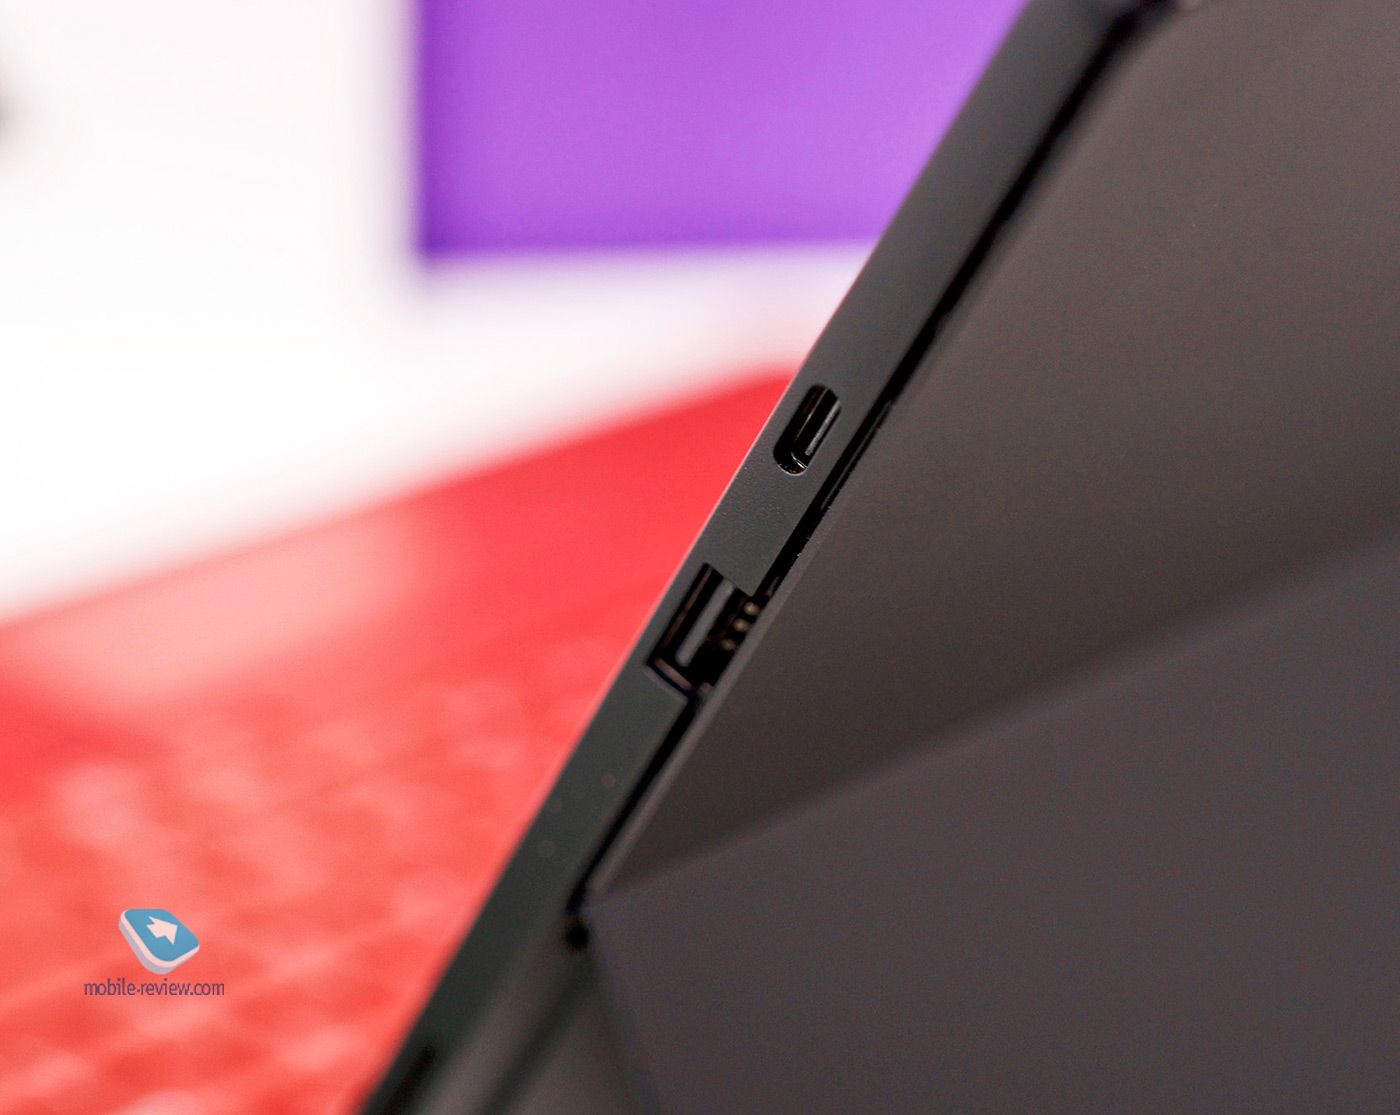 Two-in-one device review - Microsoft Surface Pro 7